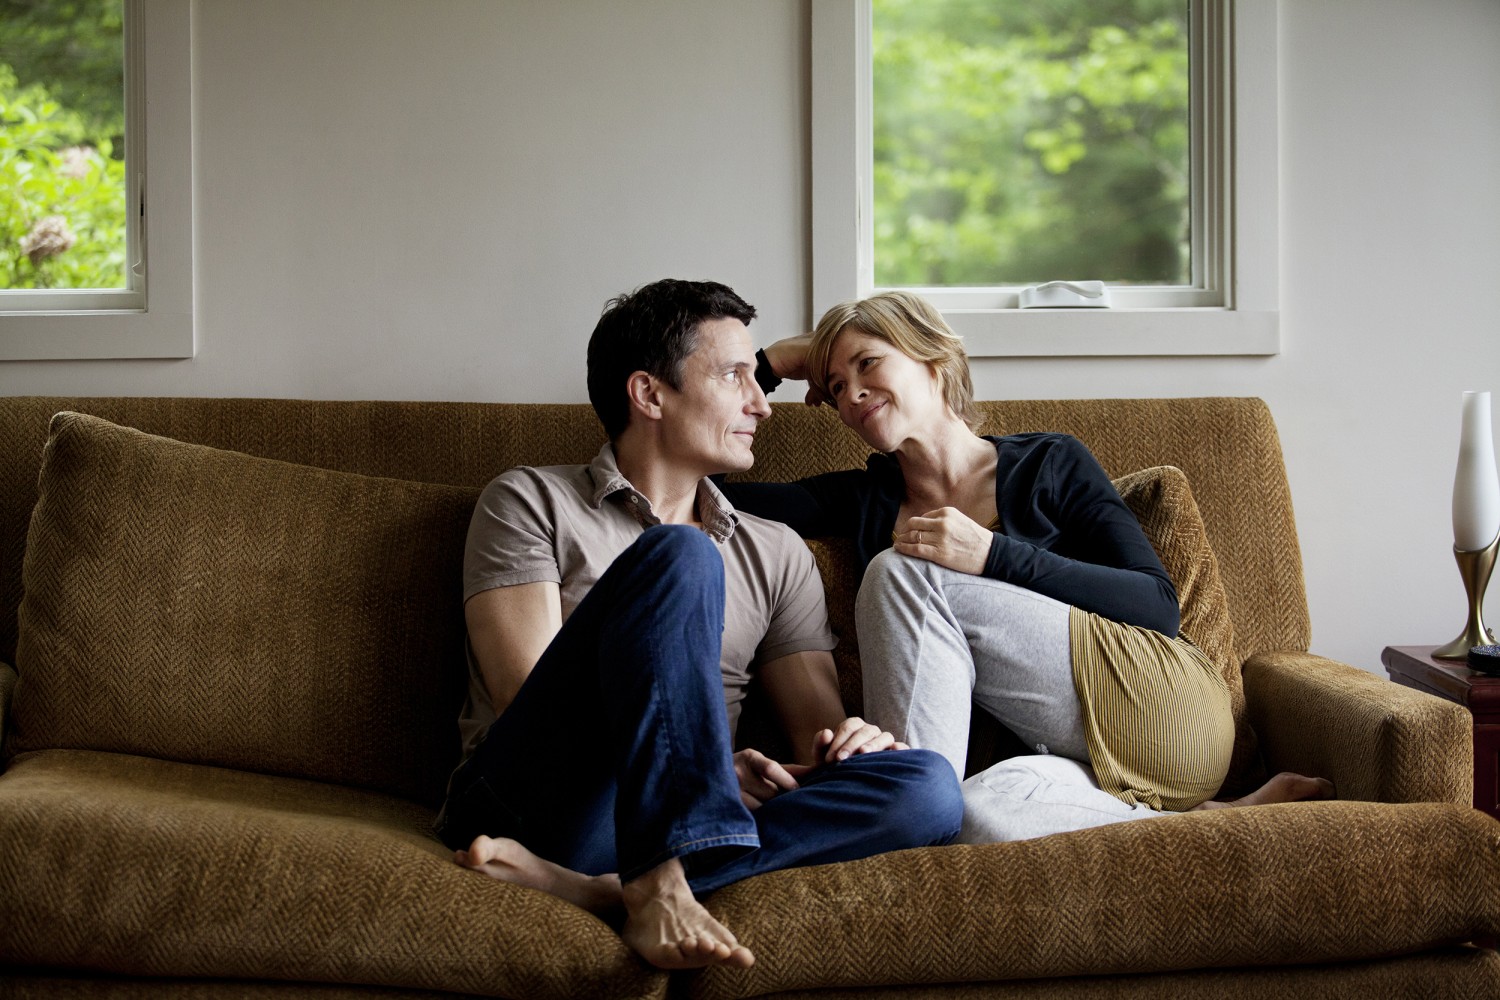 7 things to say to your spouse to